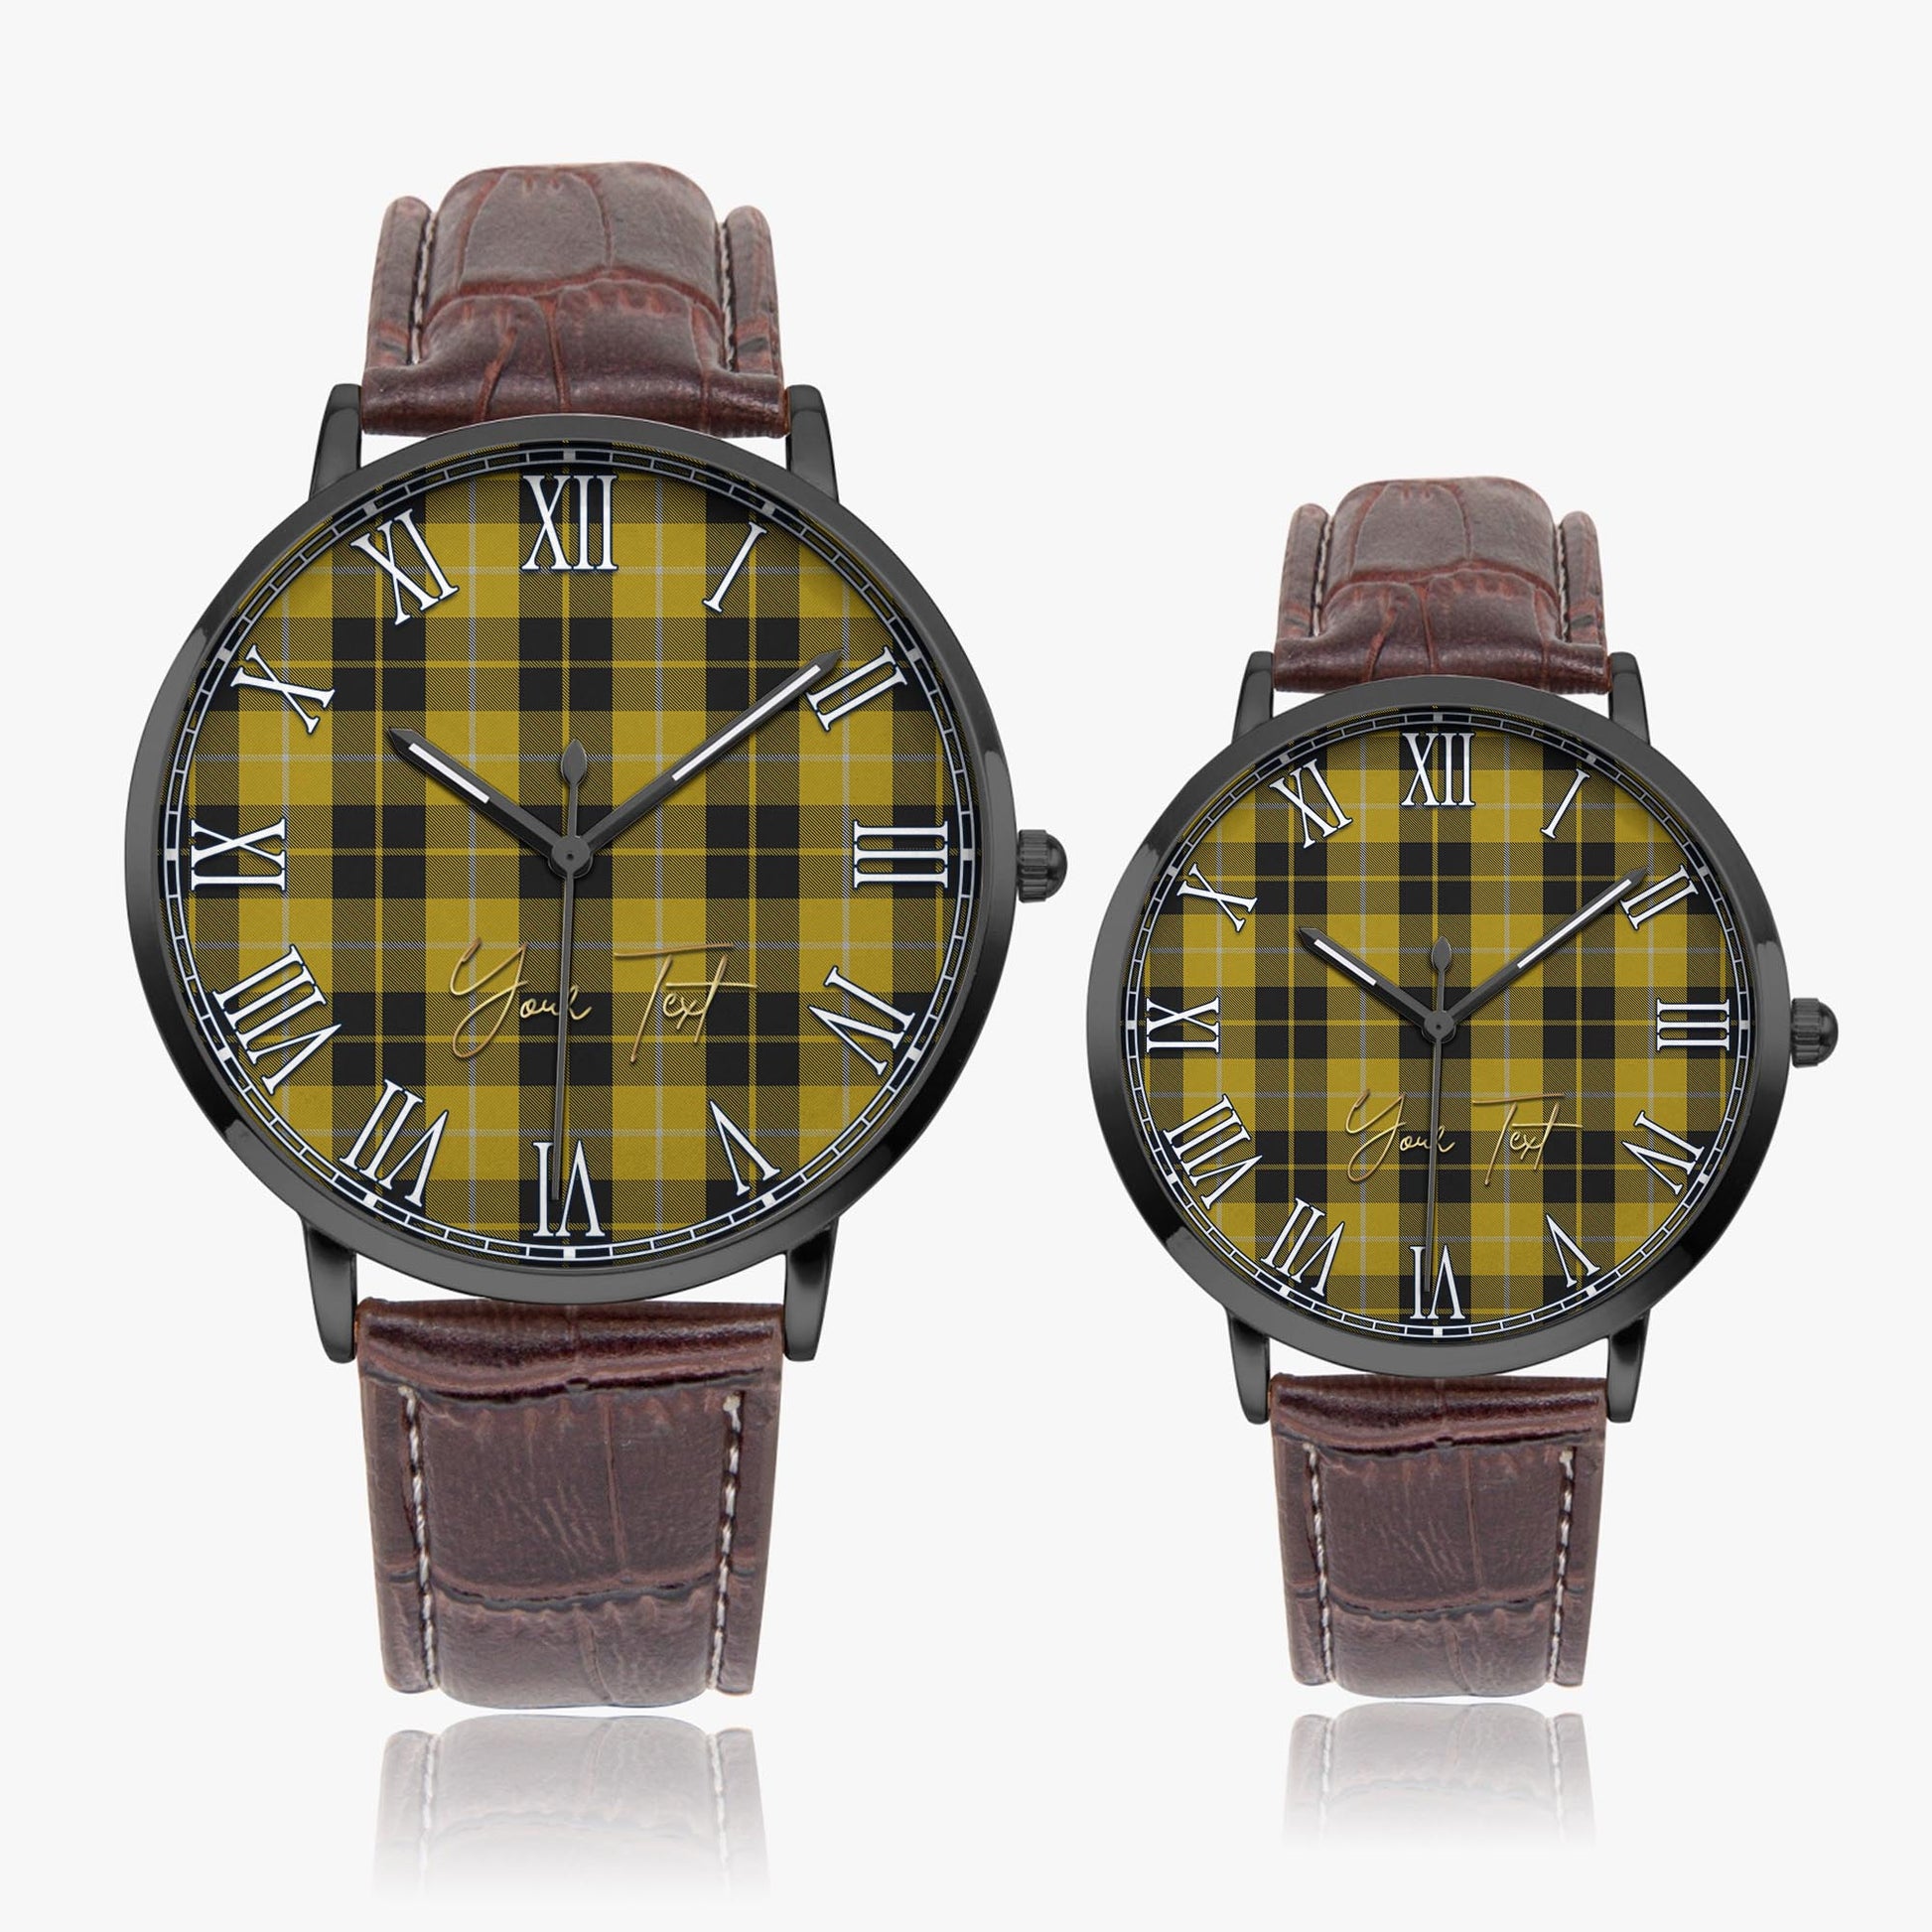 Barclay Dress Tartan Personalized Your Text Leather Trap Quartz Watch Ultra Thin Black Case With Brown Leather Strap - Tartanvibesclothing